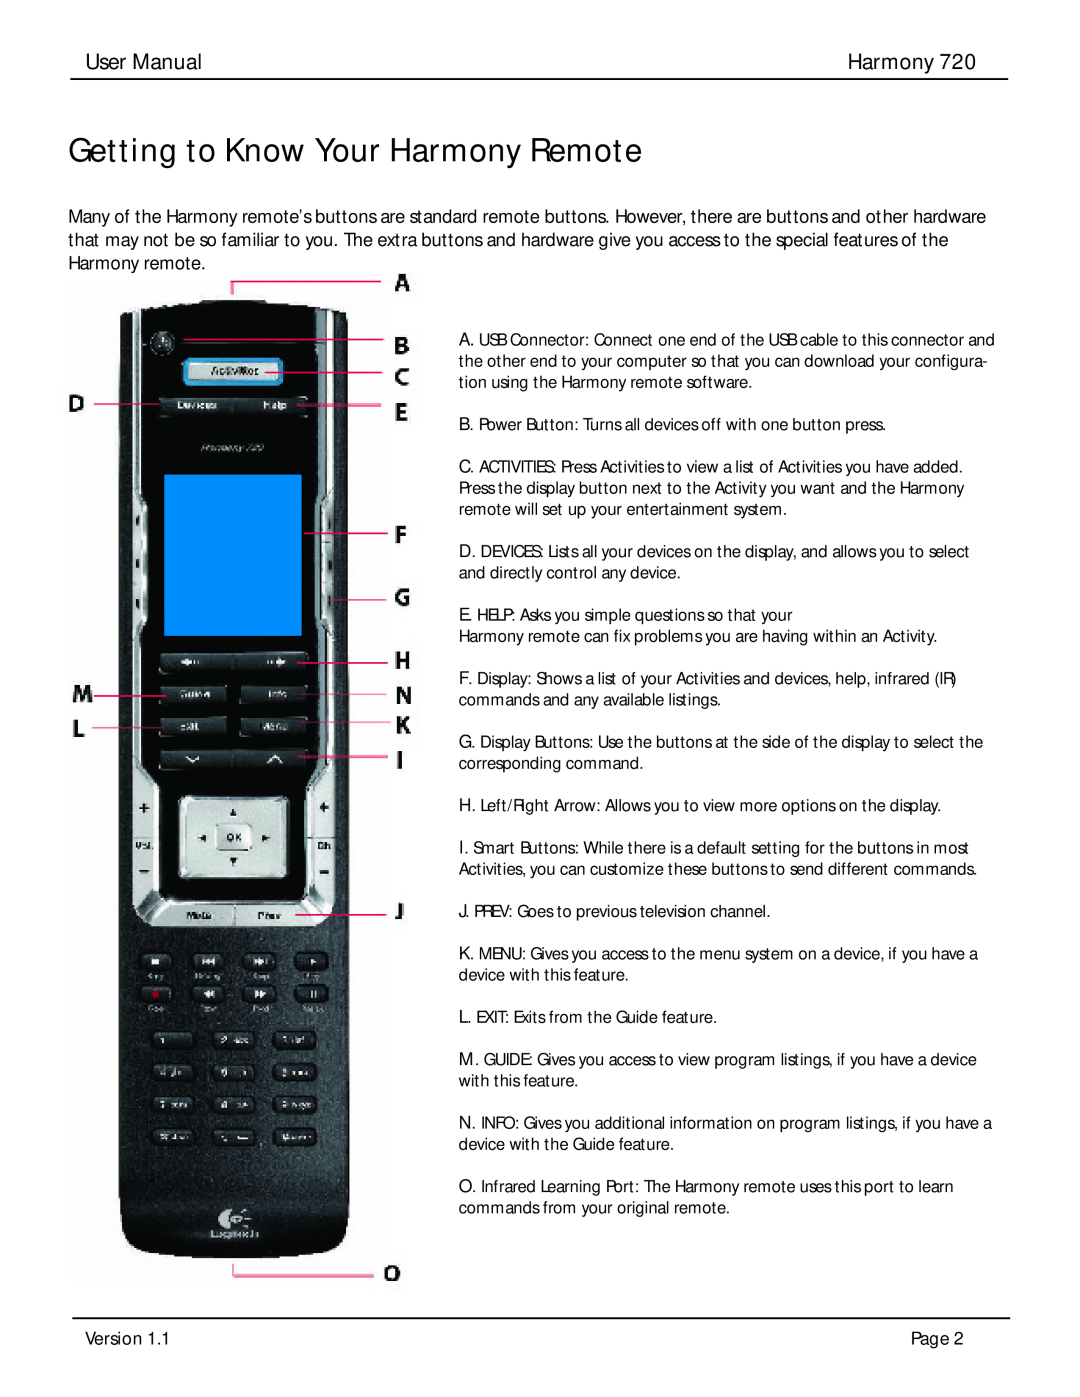 Logitech 720 user manual Getting to Know Your Harmony Remote 